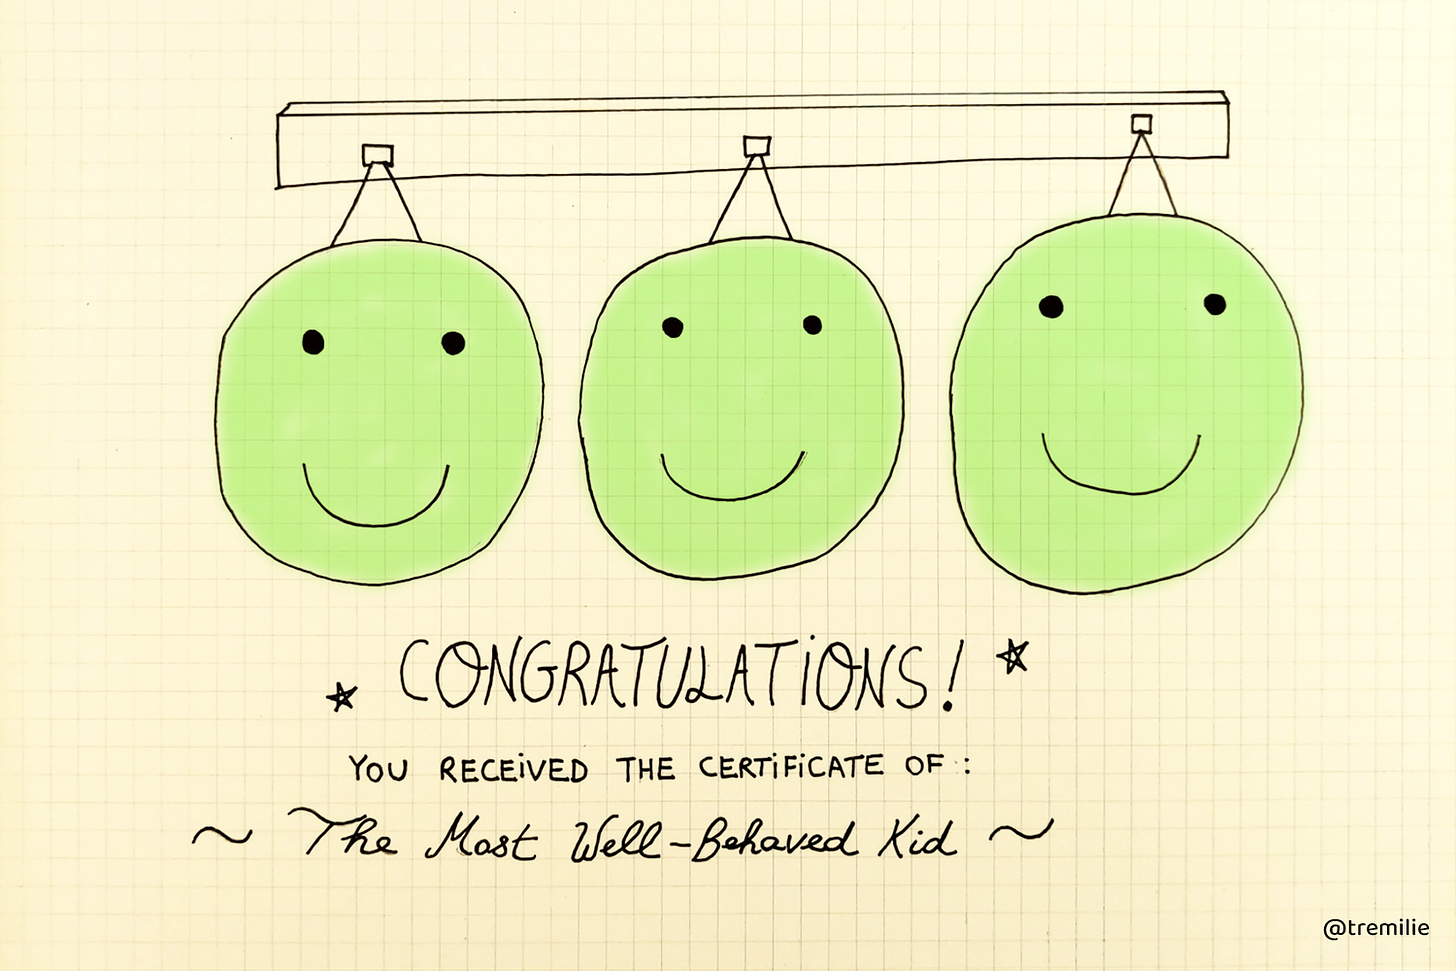 Drawing of three green smileys hanging on the wall, with the words: "Congratulations! You received the certificate of: The Most Well-Behaved Kid".